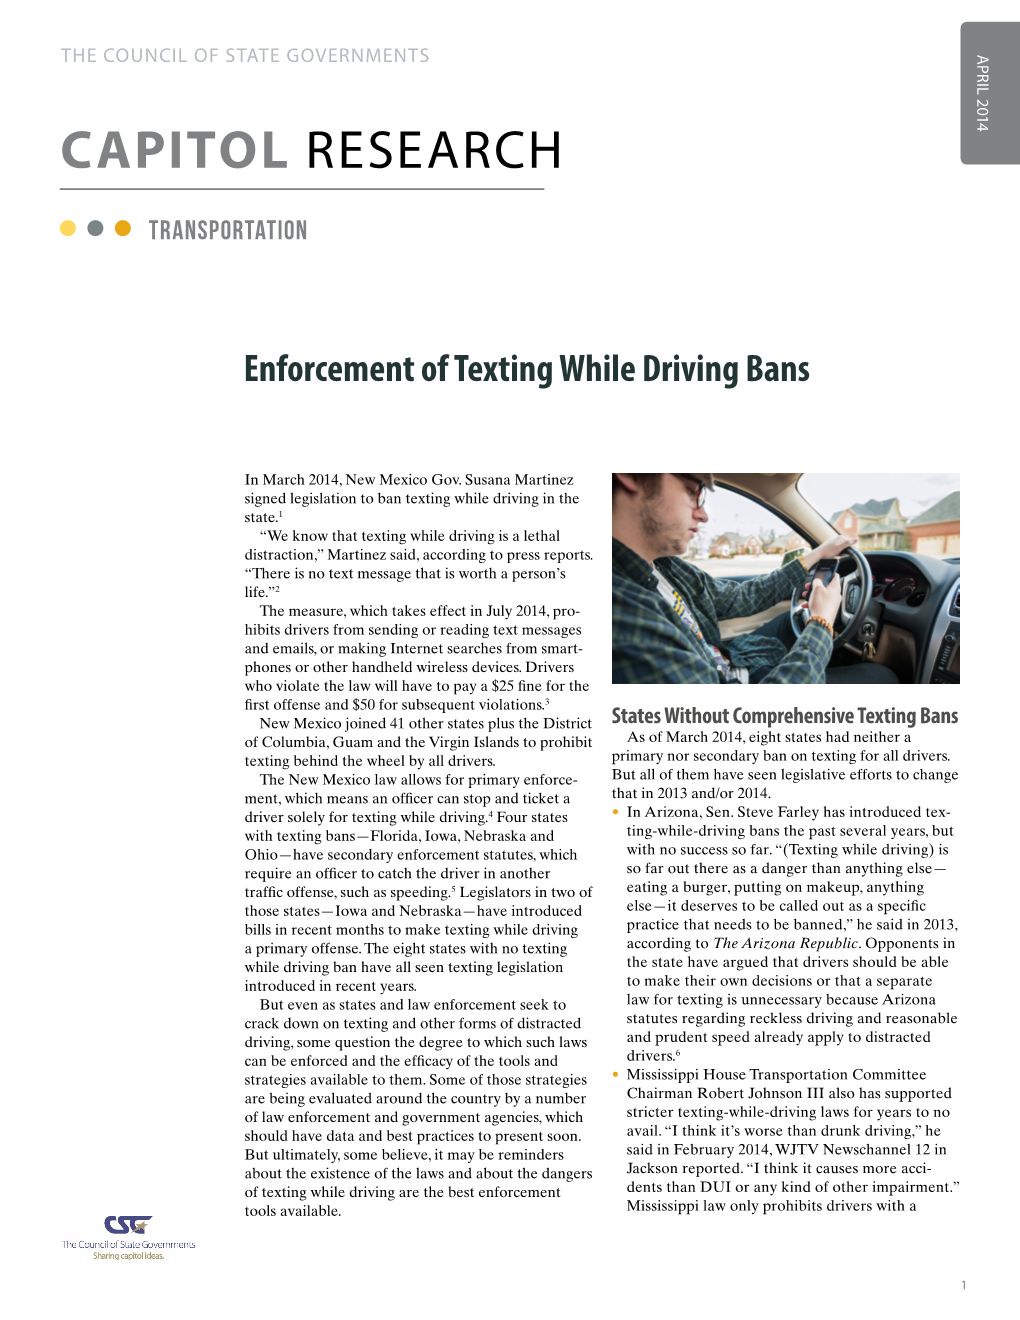 Enforcement of Texting While Driving Bans